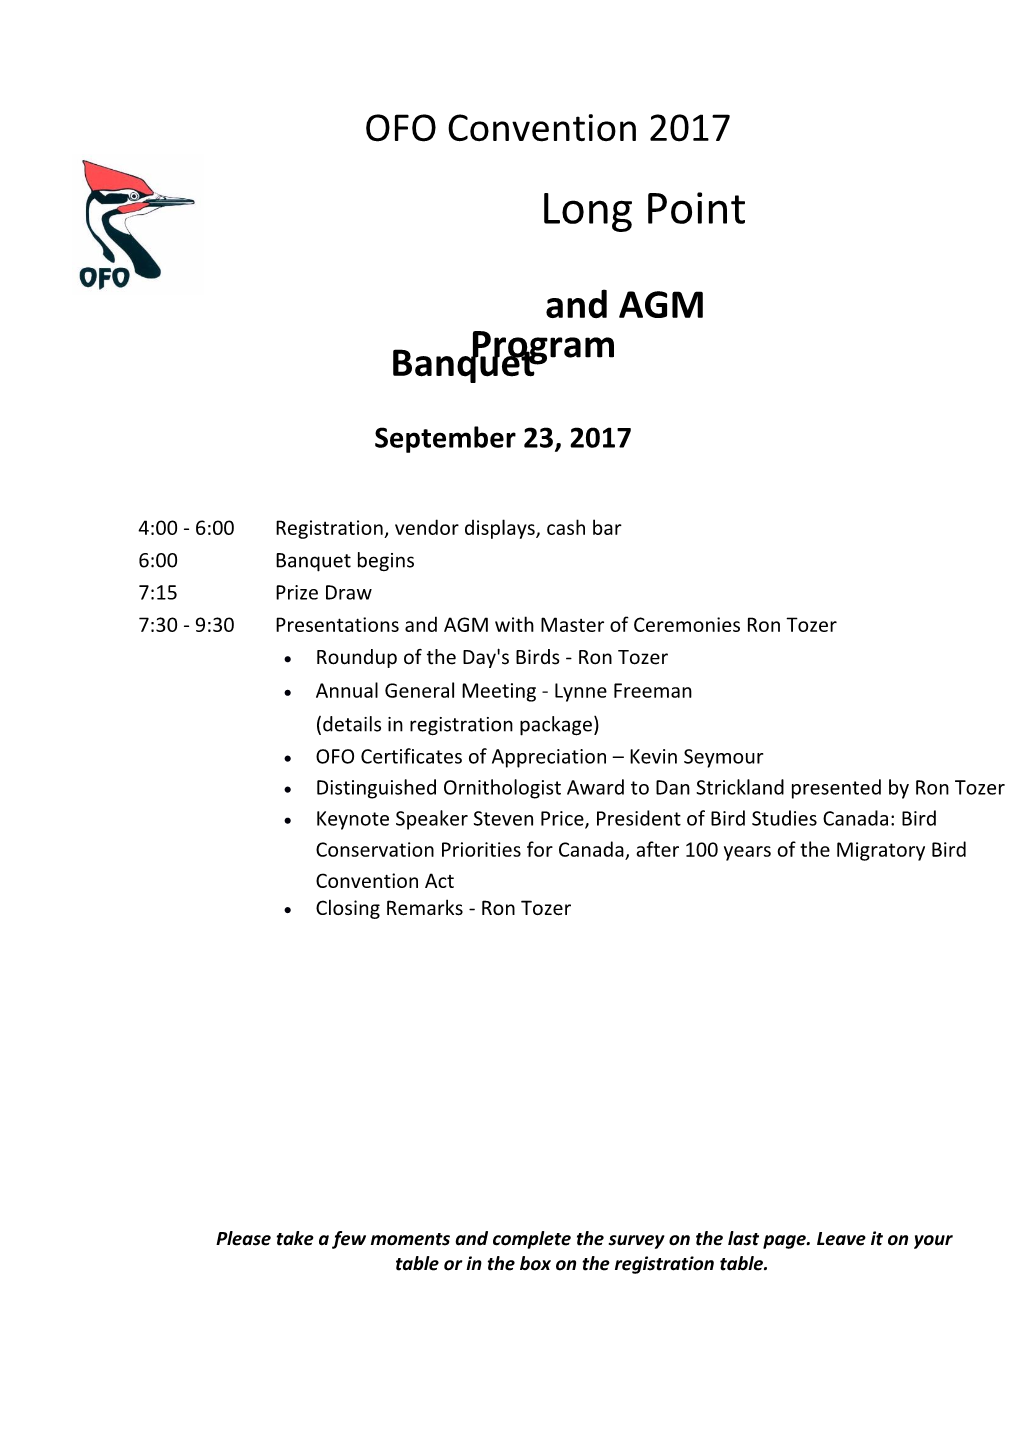 Banquet and AGM Program